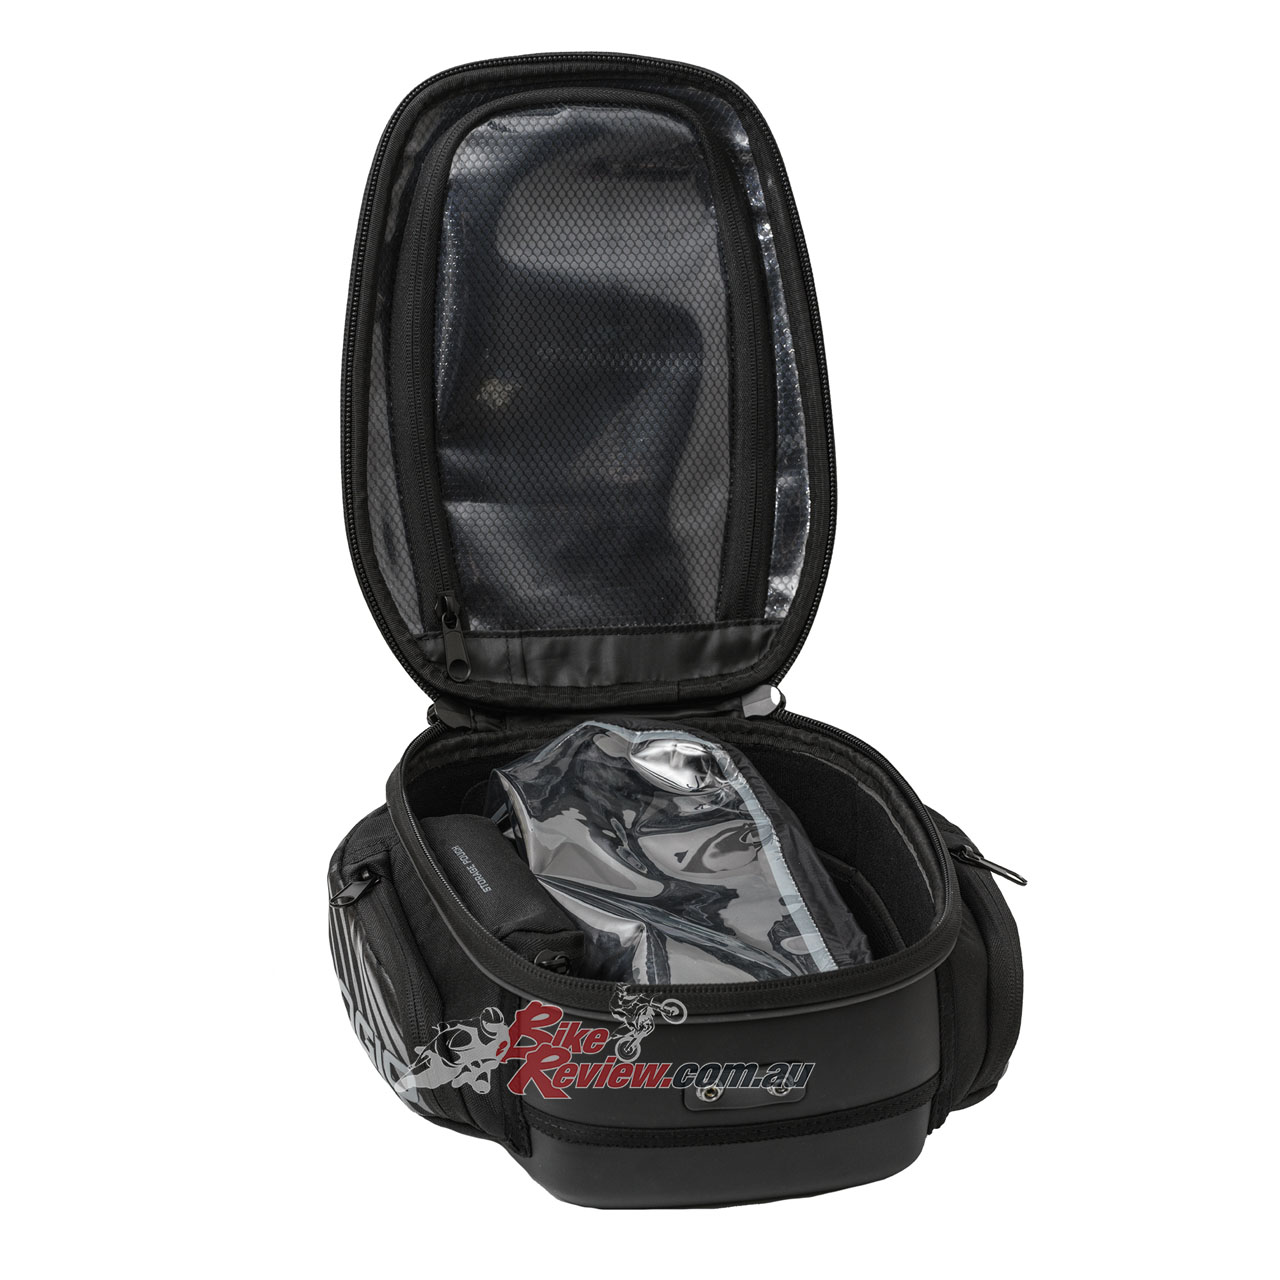 The M1 tank bag is a fixed 8L volume tank bag. The top is made from single shot molded PU with Carbon Fiber graphics and the bottom is a single shot molded PU with matte finish.